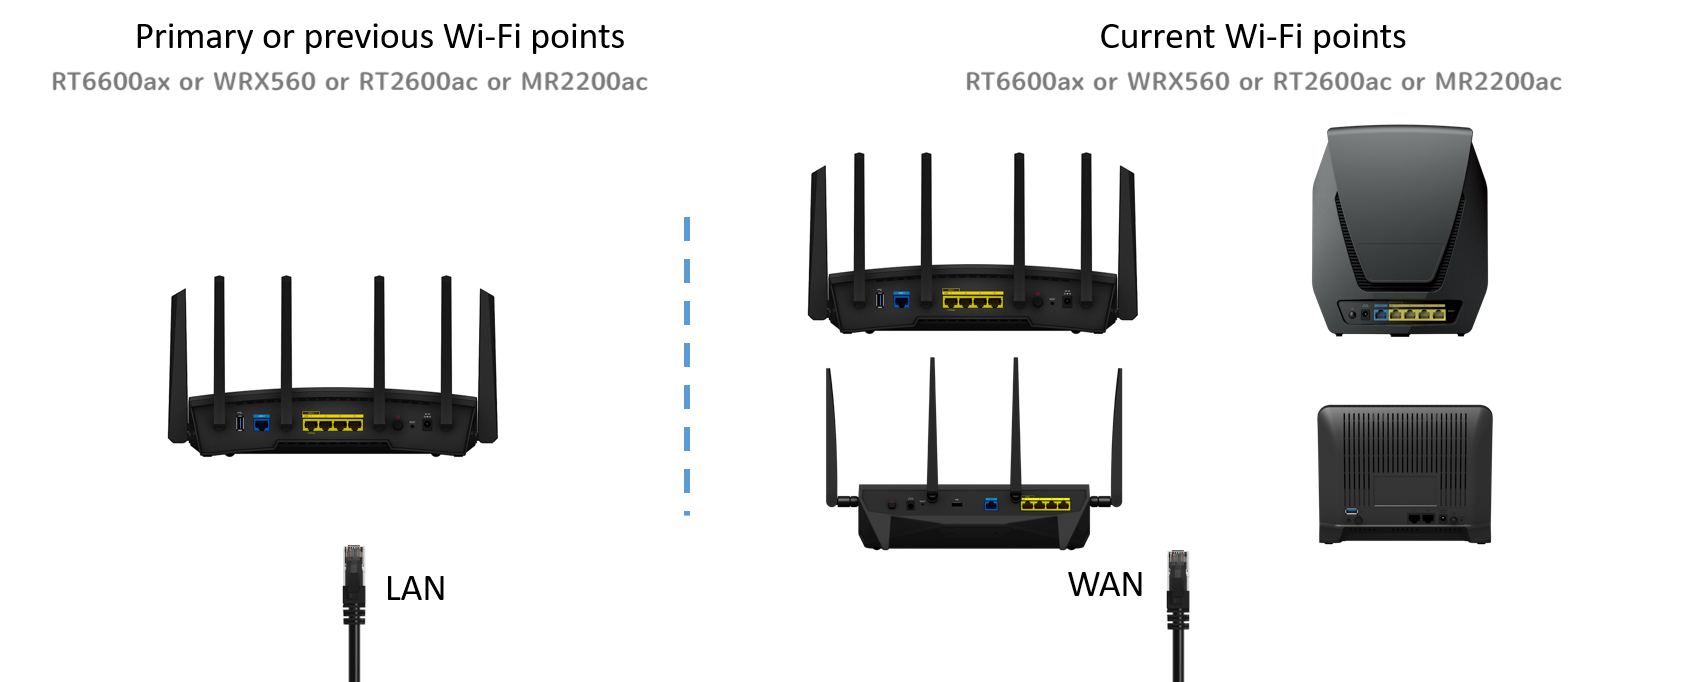 nachtmerrie heden liberaal How do I deploy a mesh Wi-Fi system? - Synology Knowledge Center